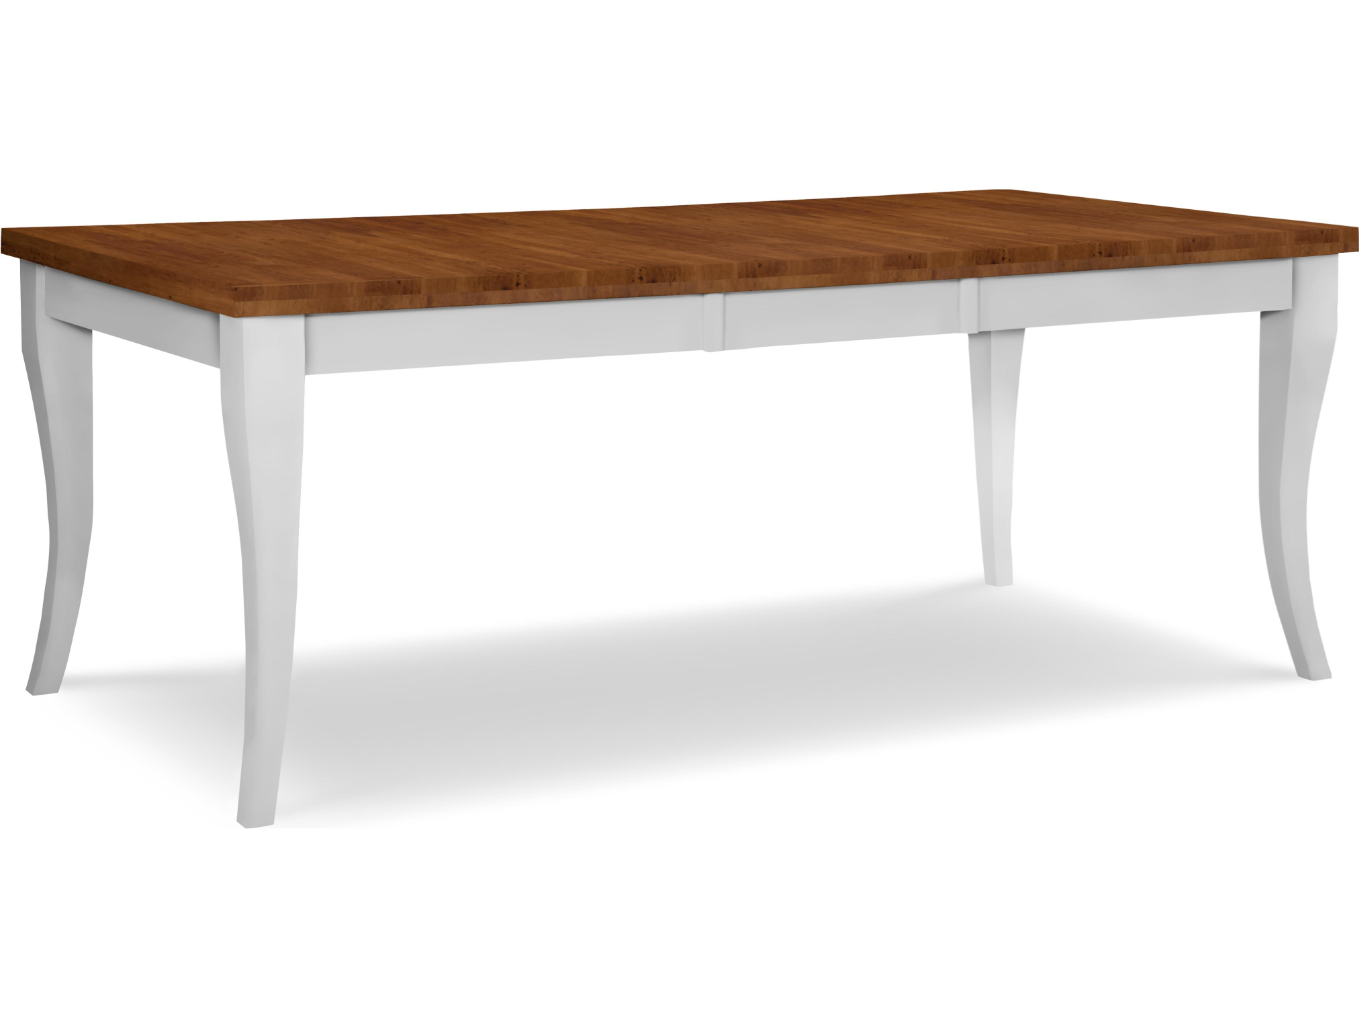 The Callie Extension Table